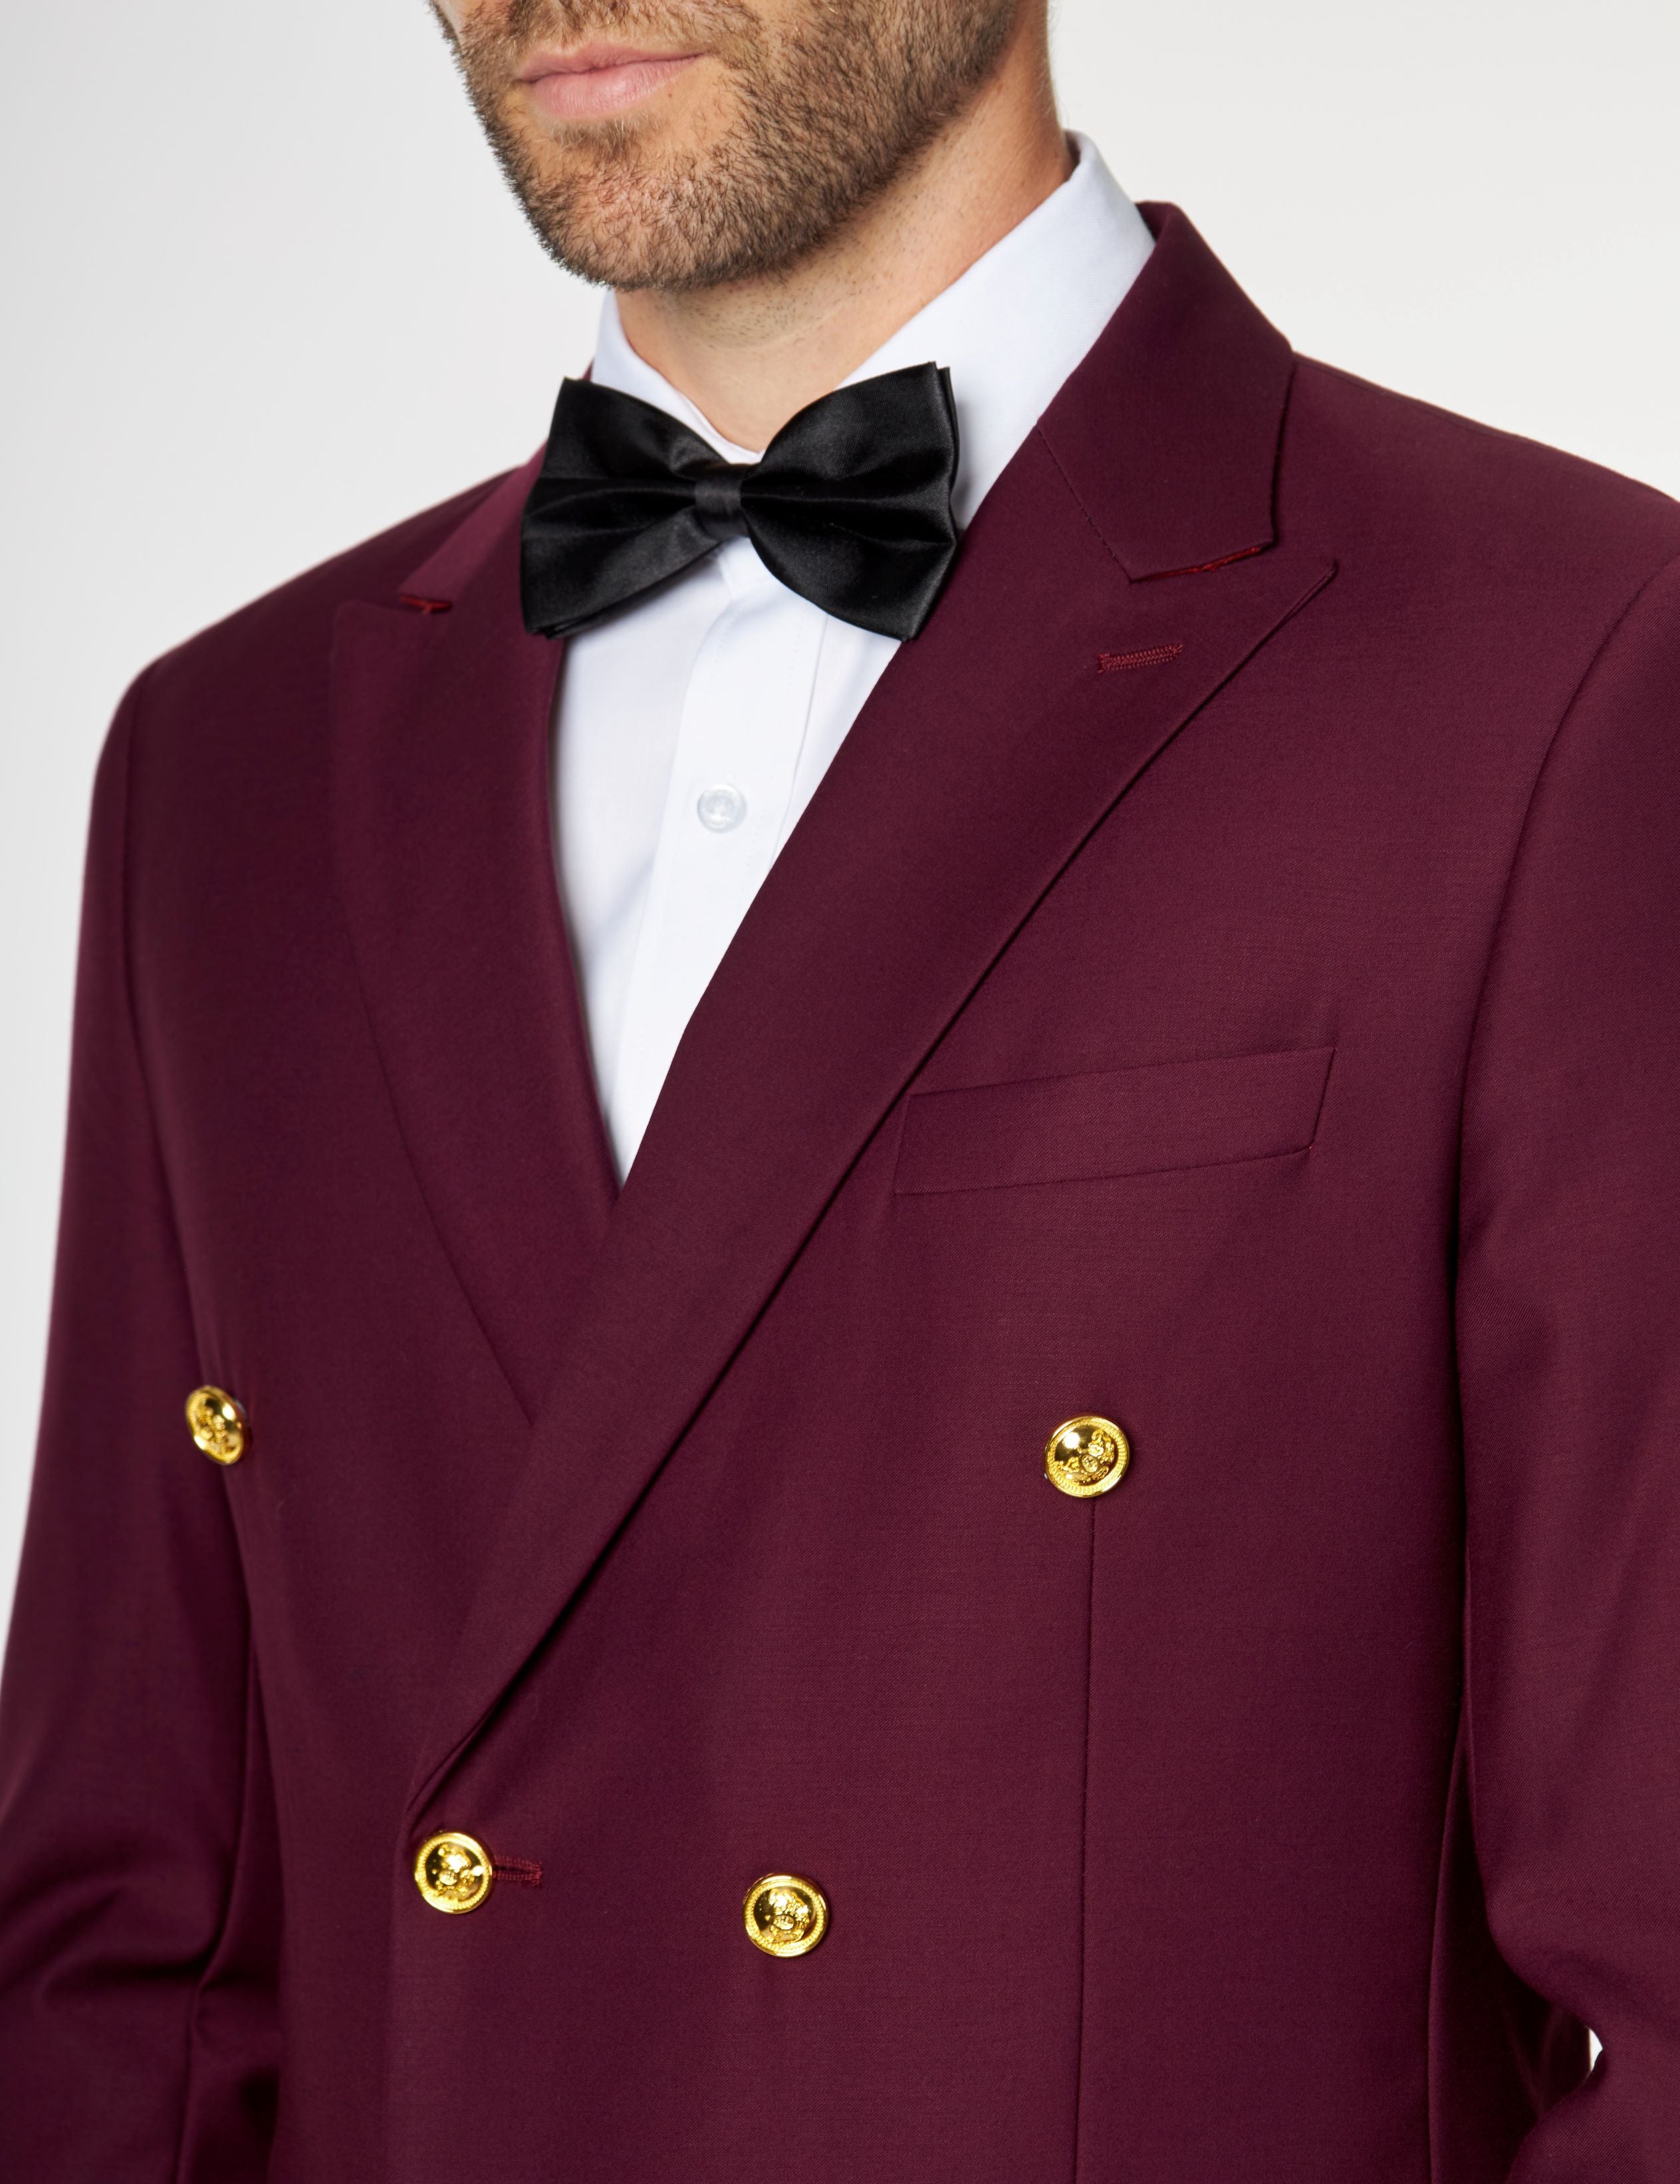 MAROON DOUBLE BREASTED GOLD BUTTON JACKET